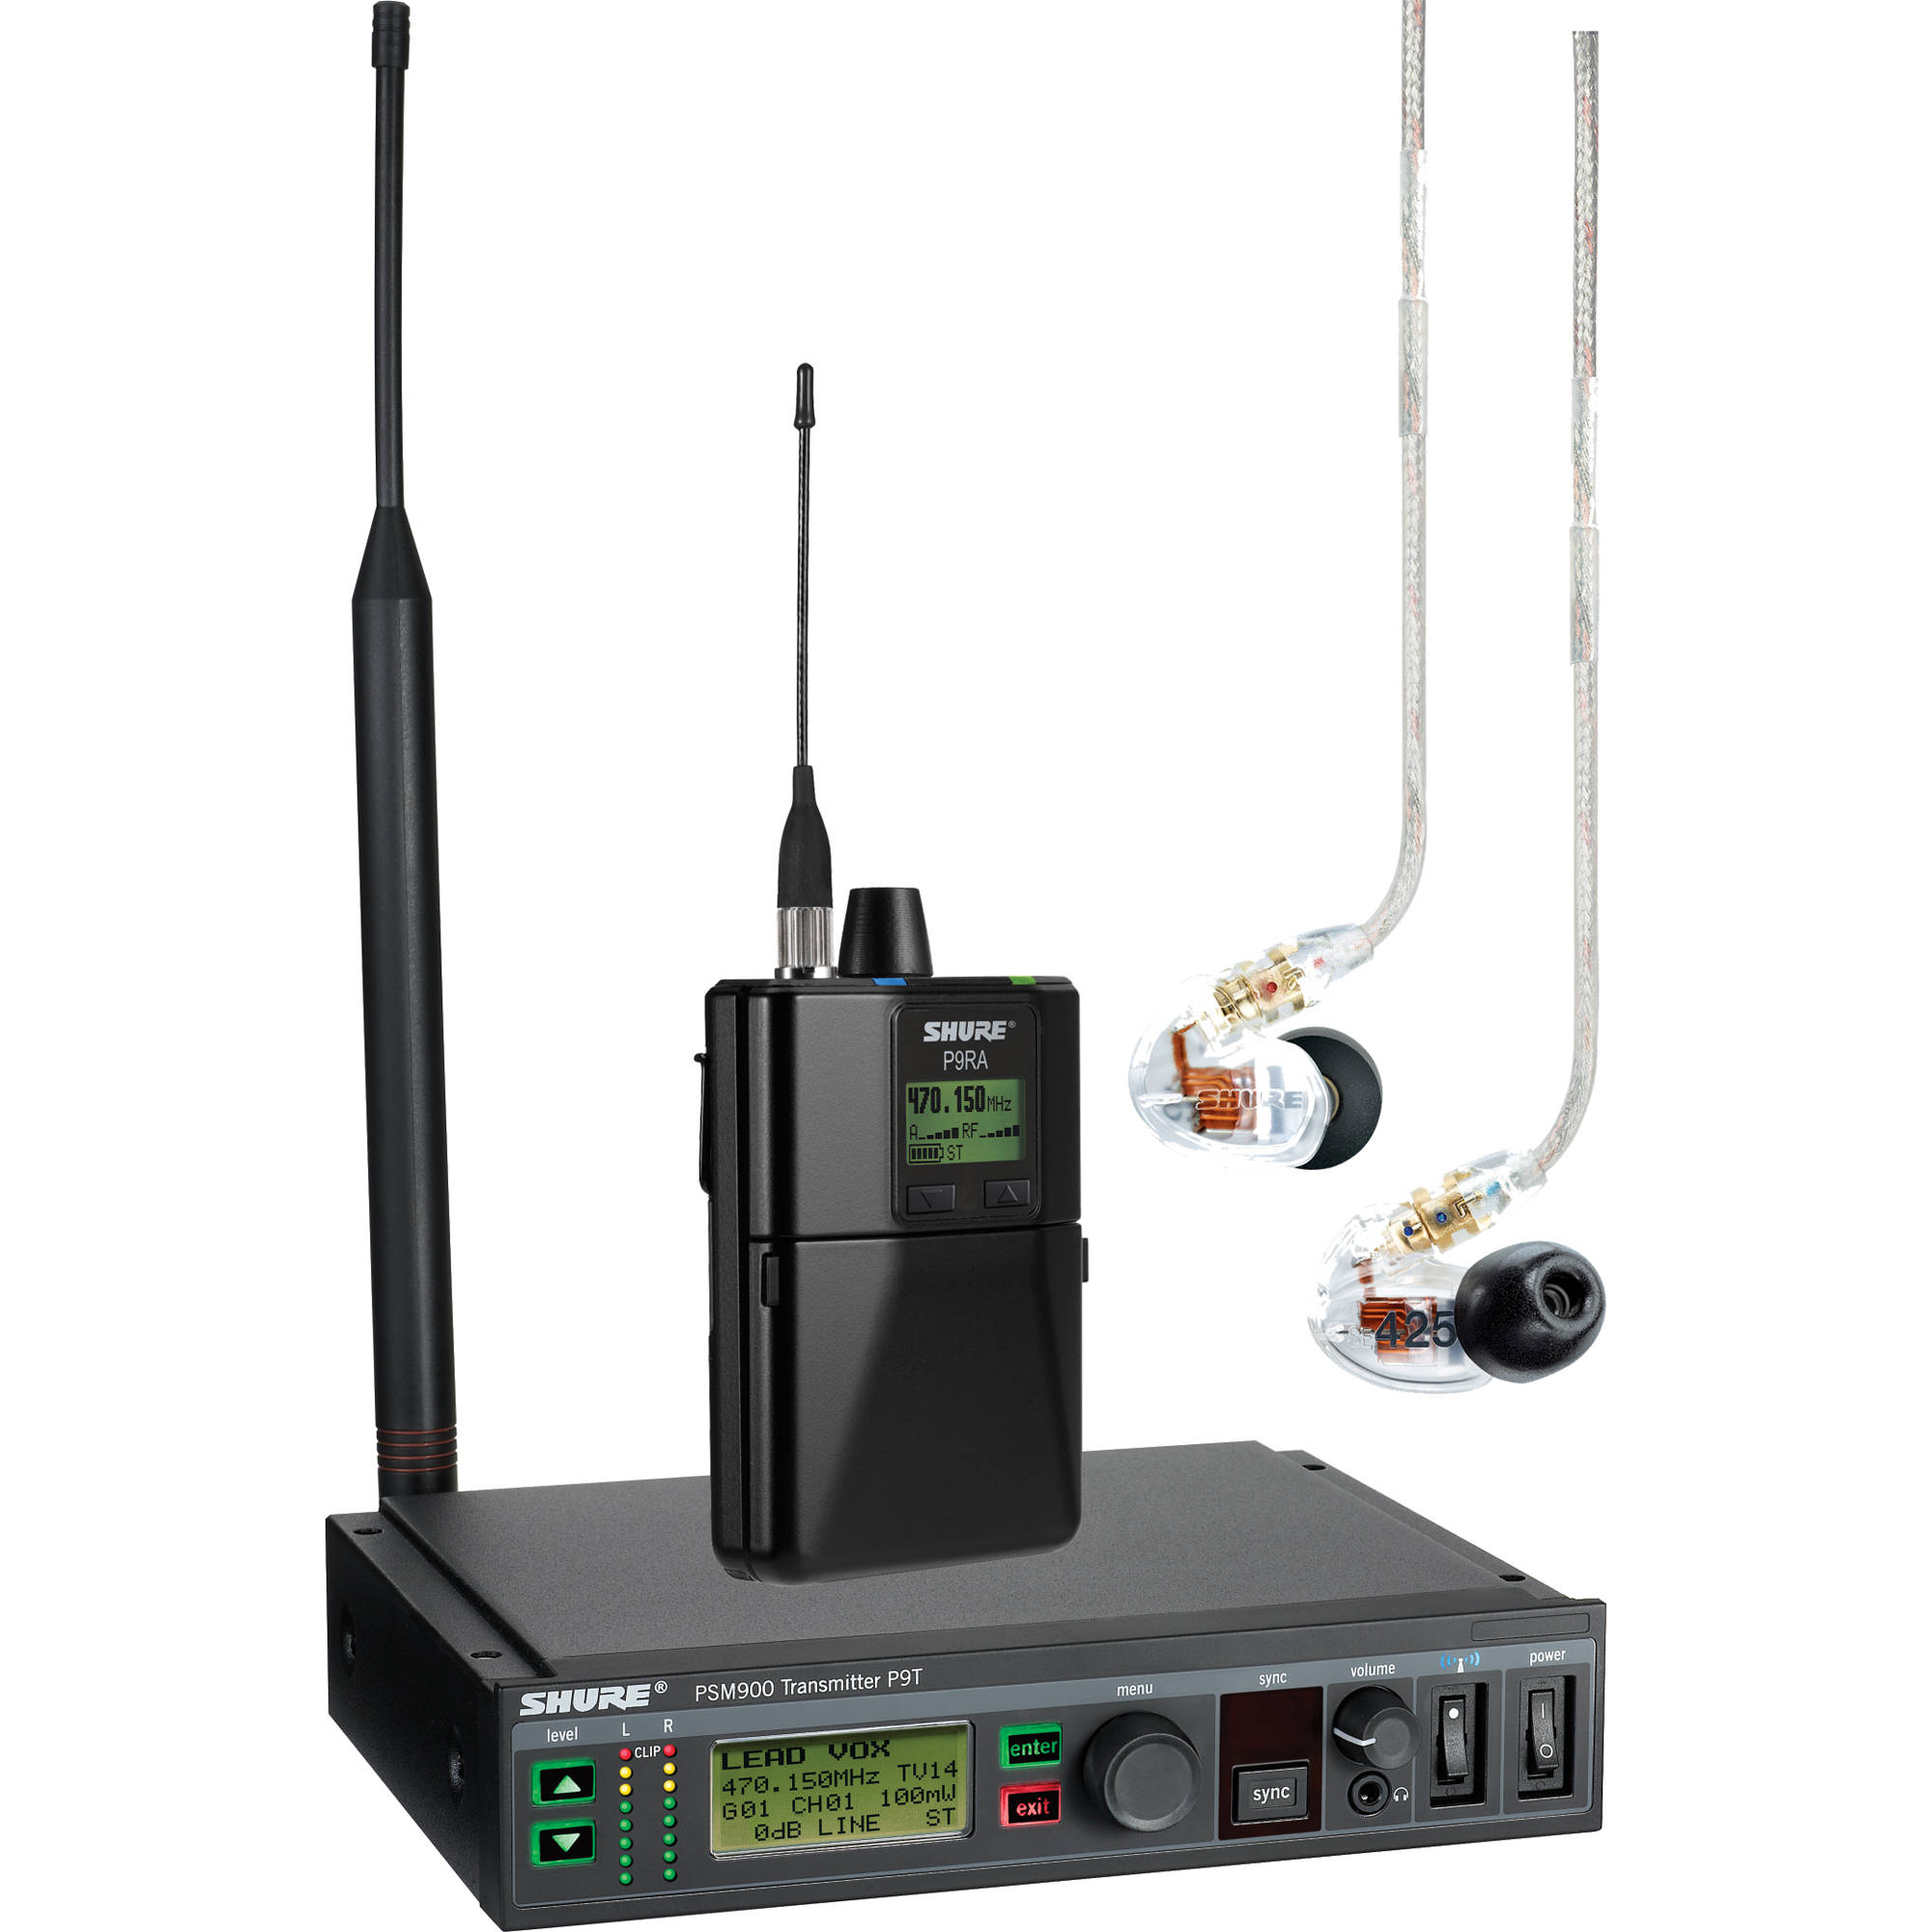 Shure PSM900 (P9TRA+425CL G7) | Wireless In-Ear Monitoring System w/ SE425-CL Earphones